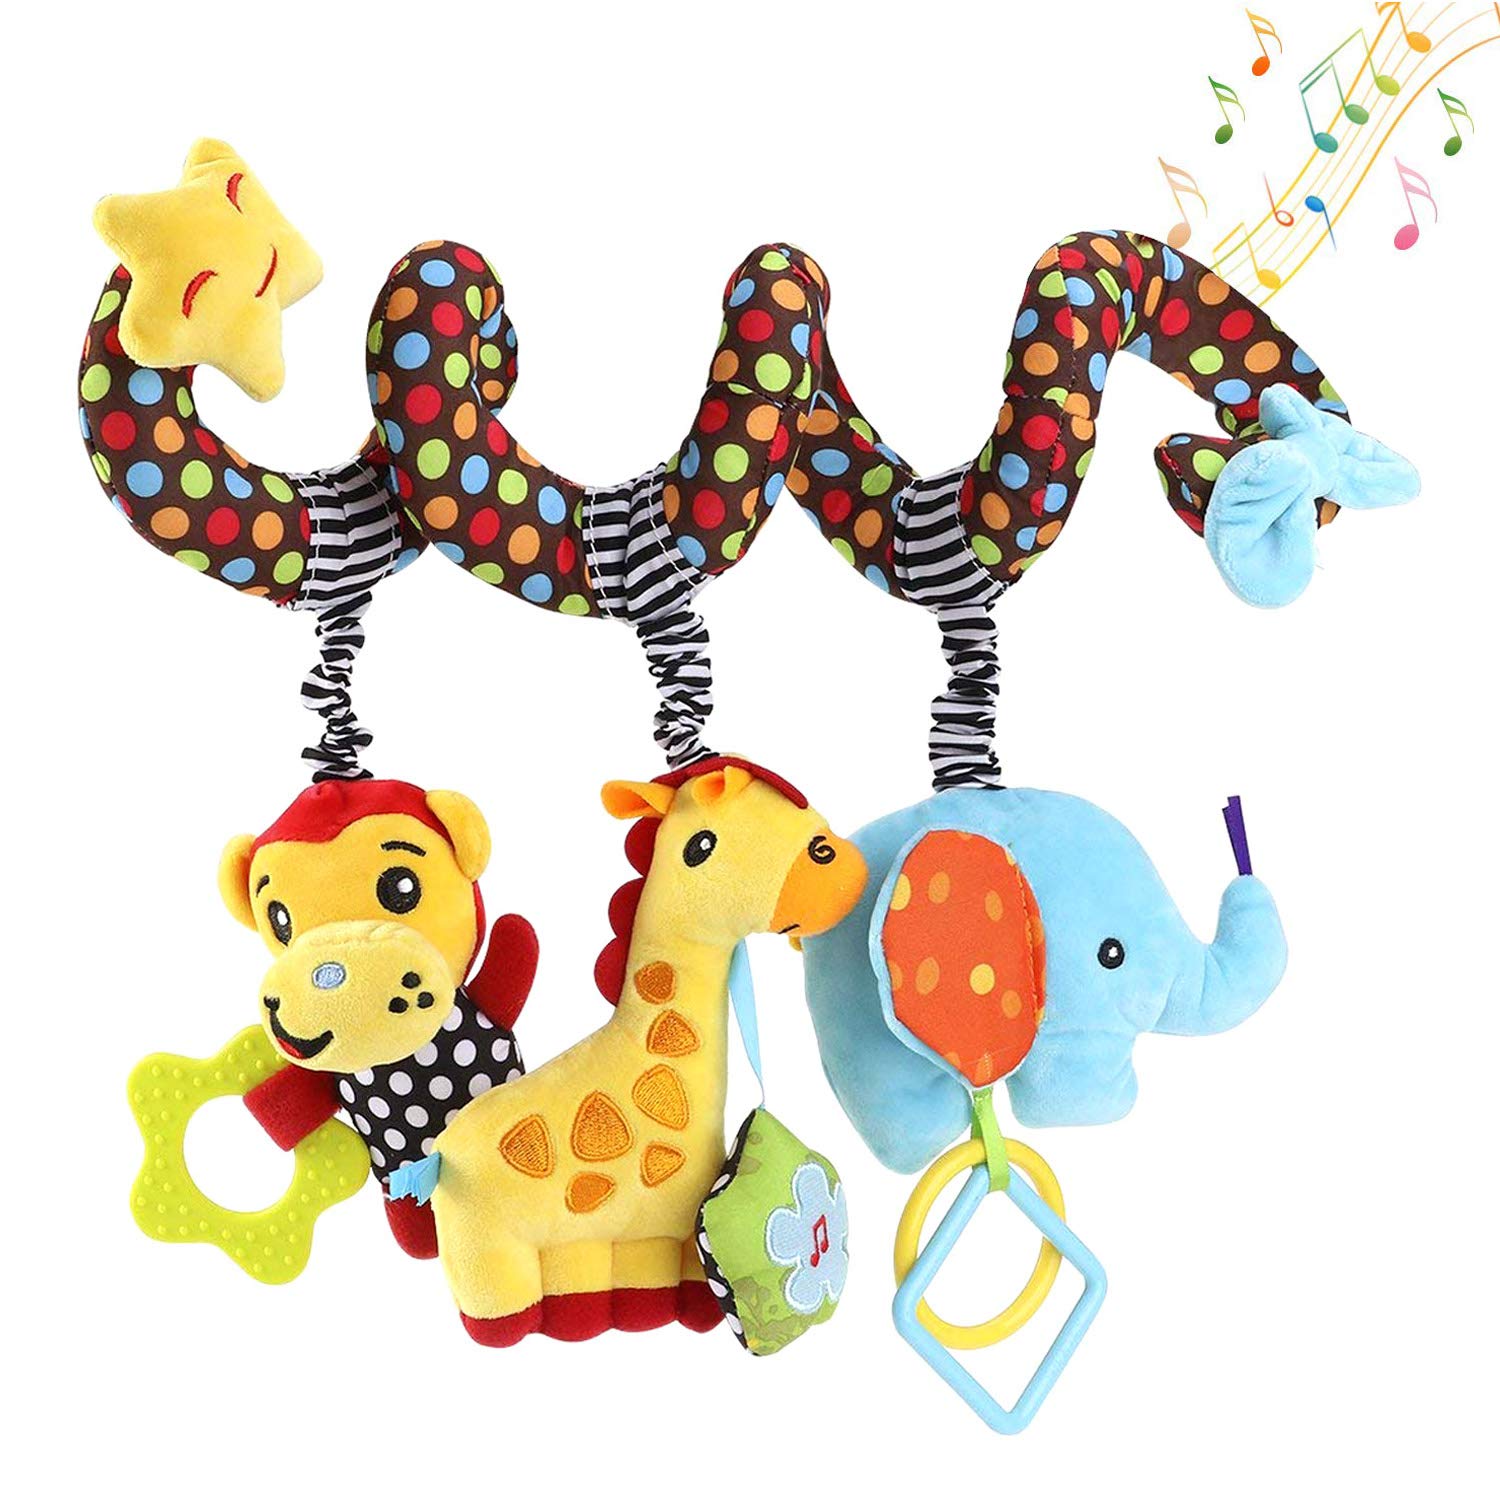 willway Hanging Toys for Car Seat Crib Mobile, Infant Baby Spiral Plush  Toys for Crib Bed Stroller Car Seat Bar.